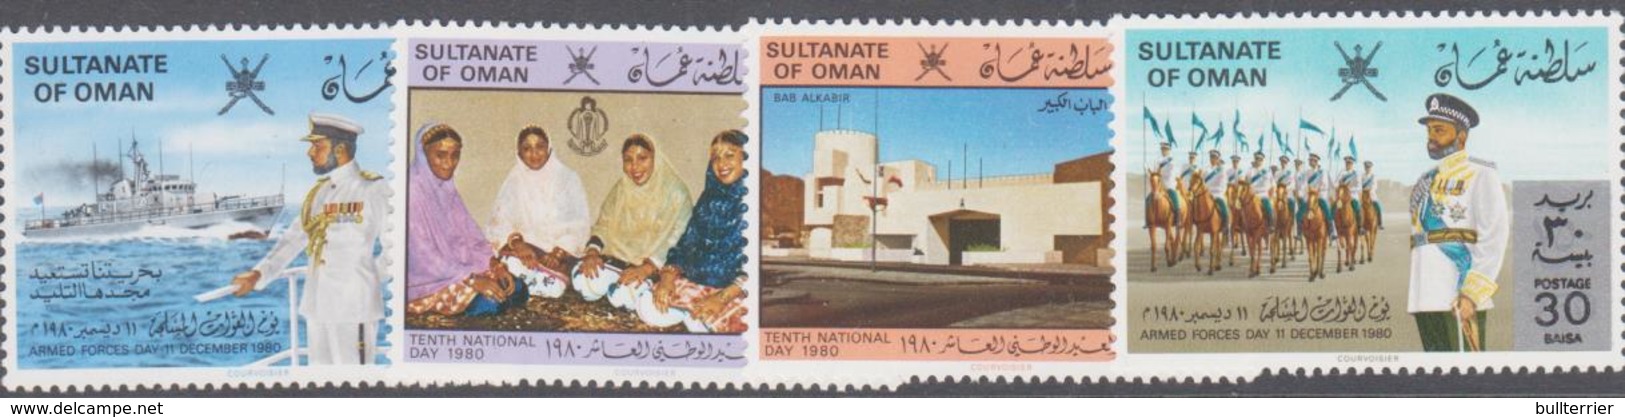 OMAN -  1981 - SURCHARGES ET OF 4 MINT NEVER HINGED , ,SG CAT £33 - Oman